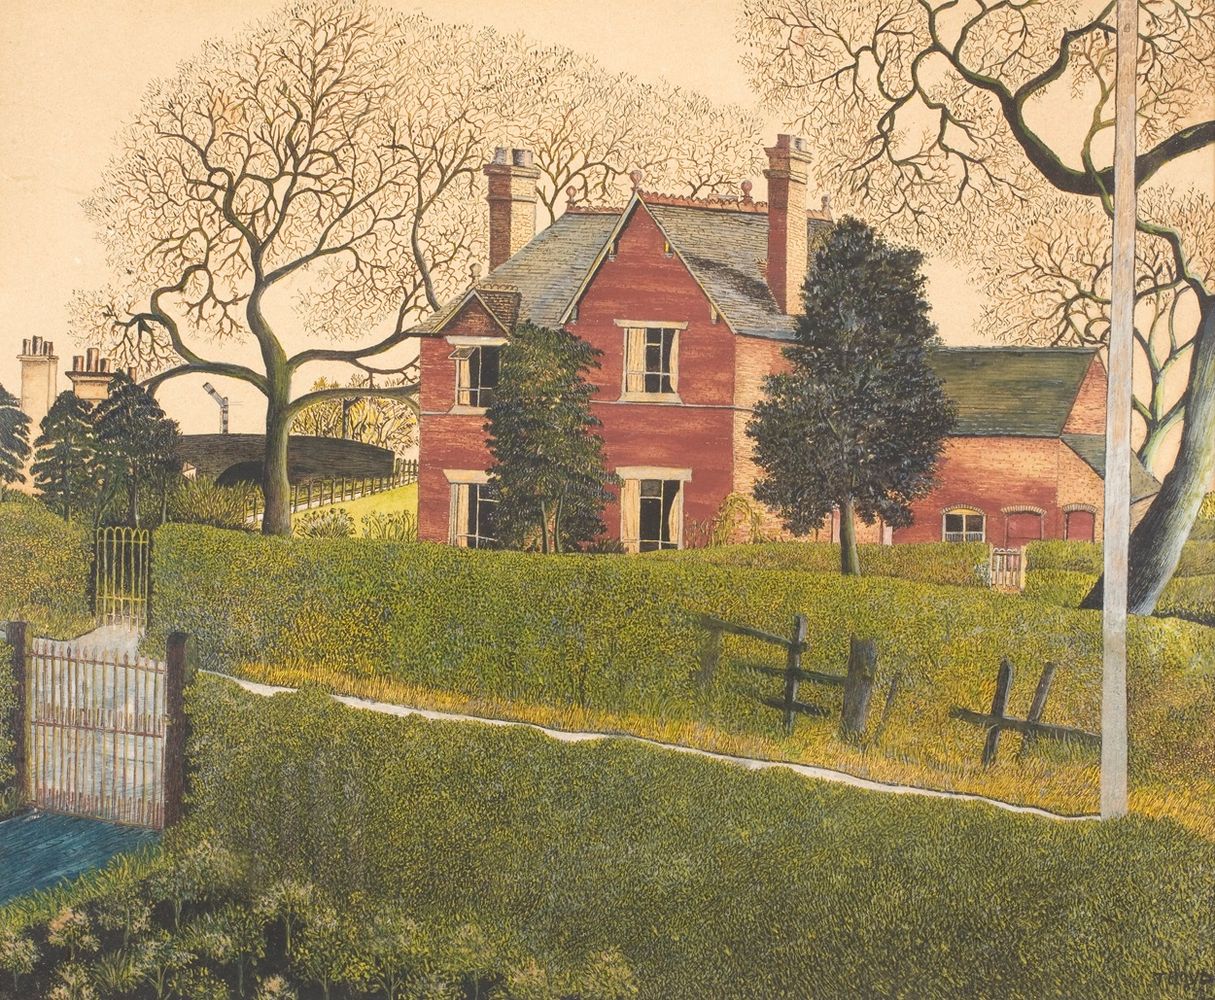 The Red House, c. 1950-57